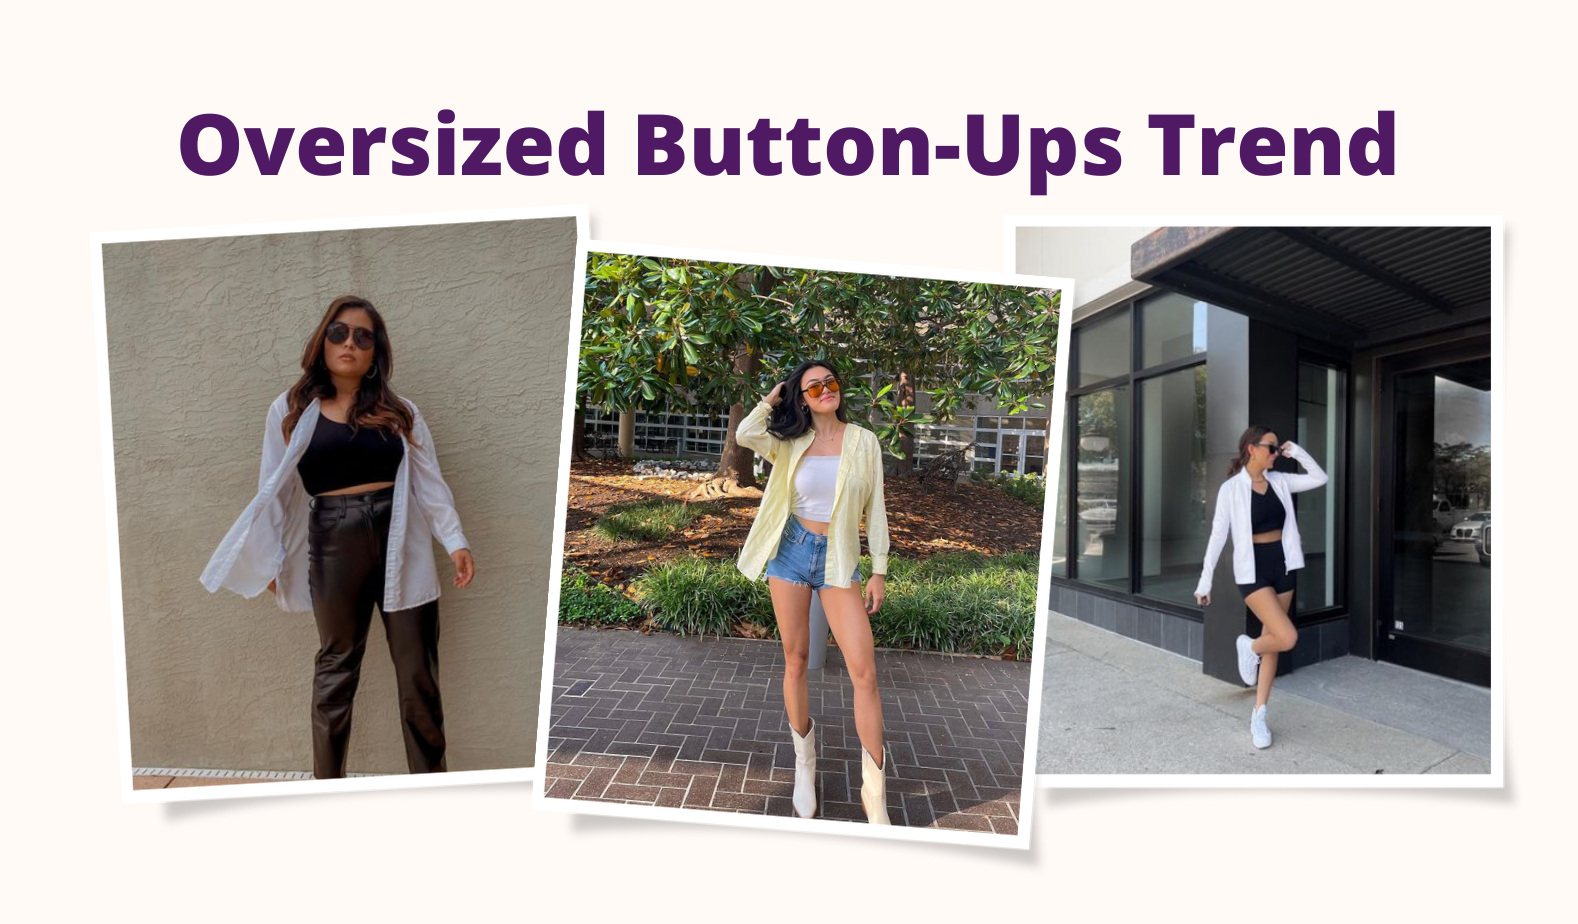 Oversized Button-Ups Trend